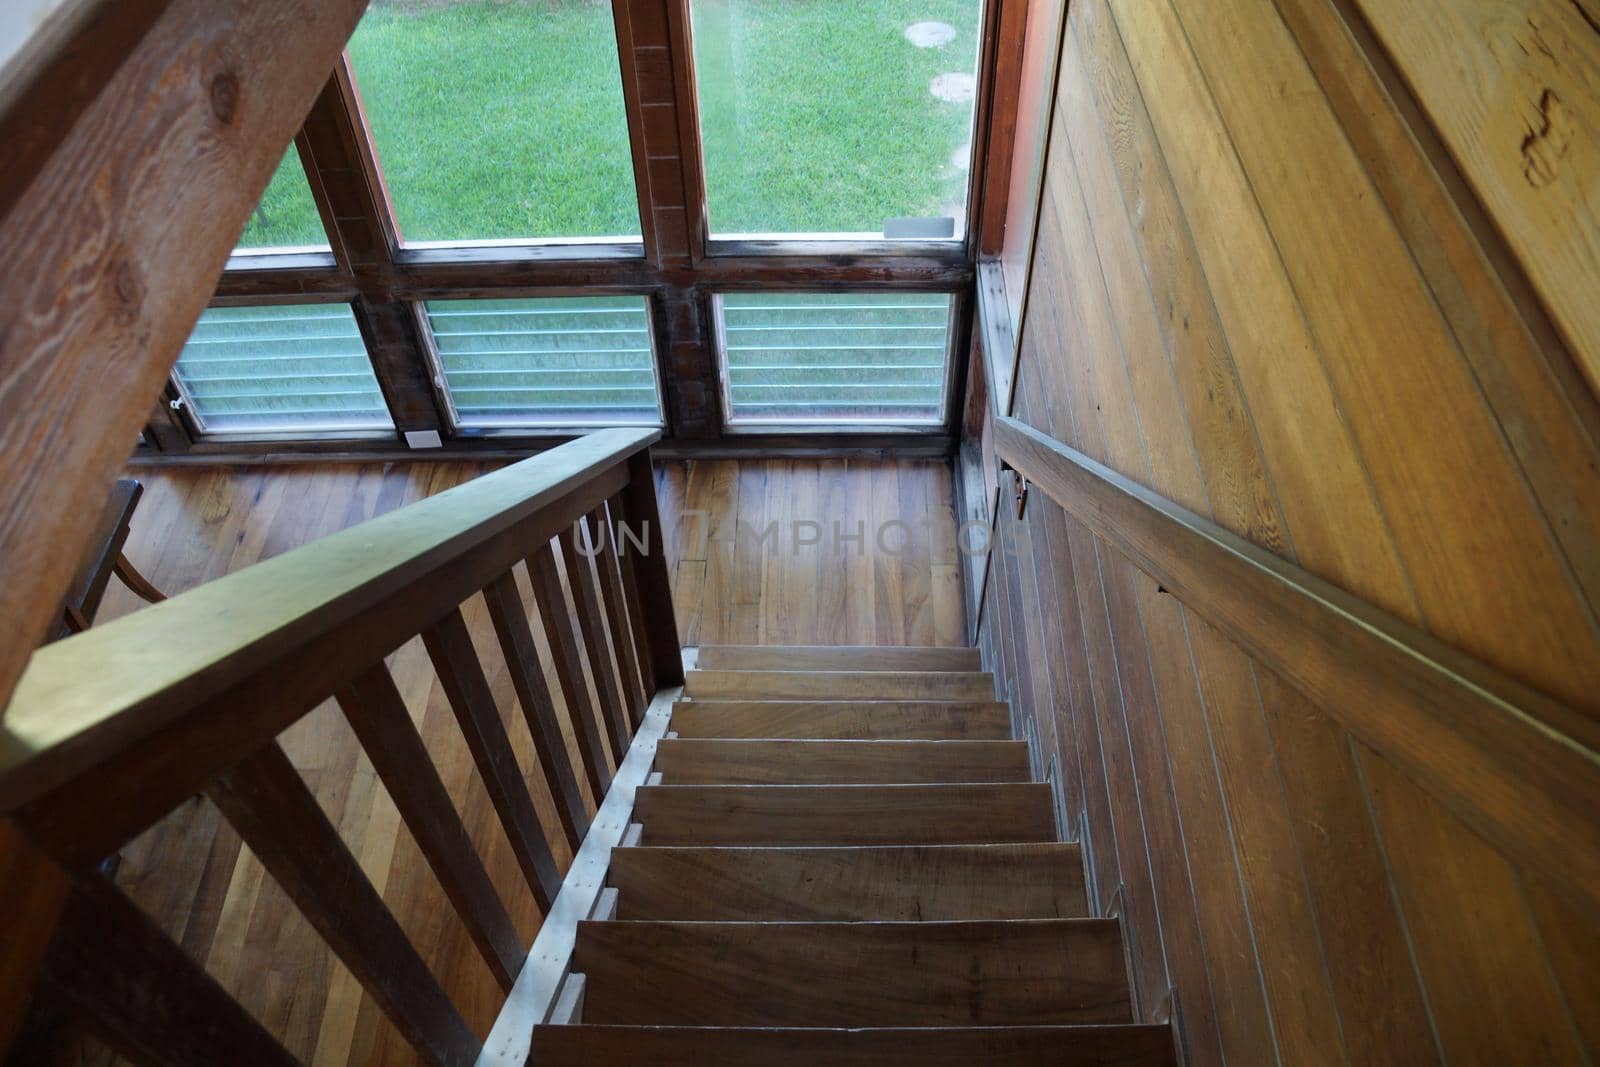 Wood Staircase leading downstairs to the dinning room with large windows featuring views of outside
